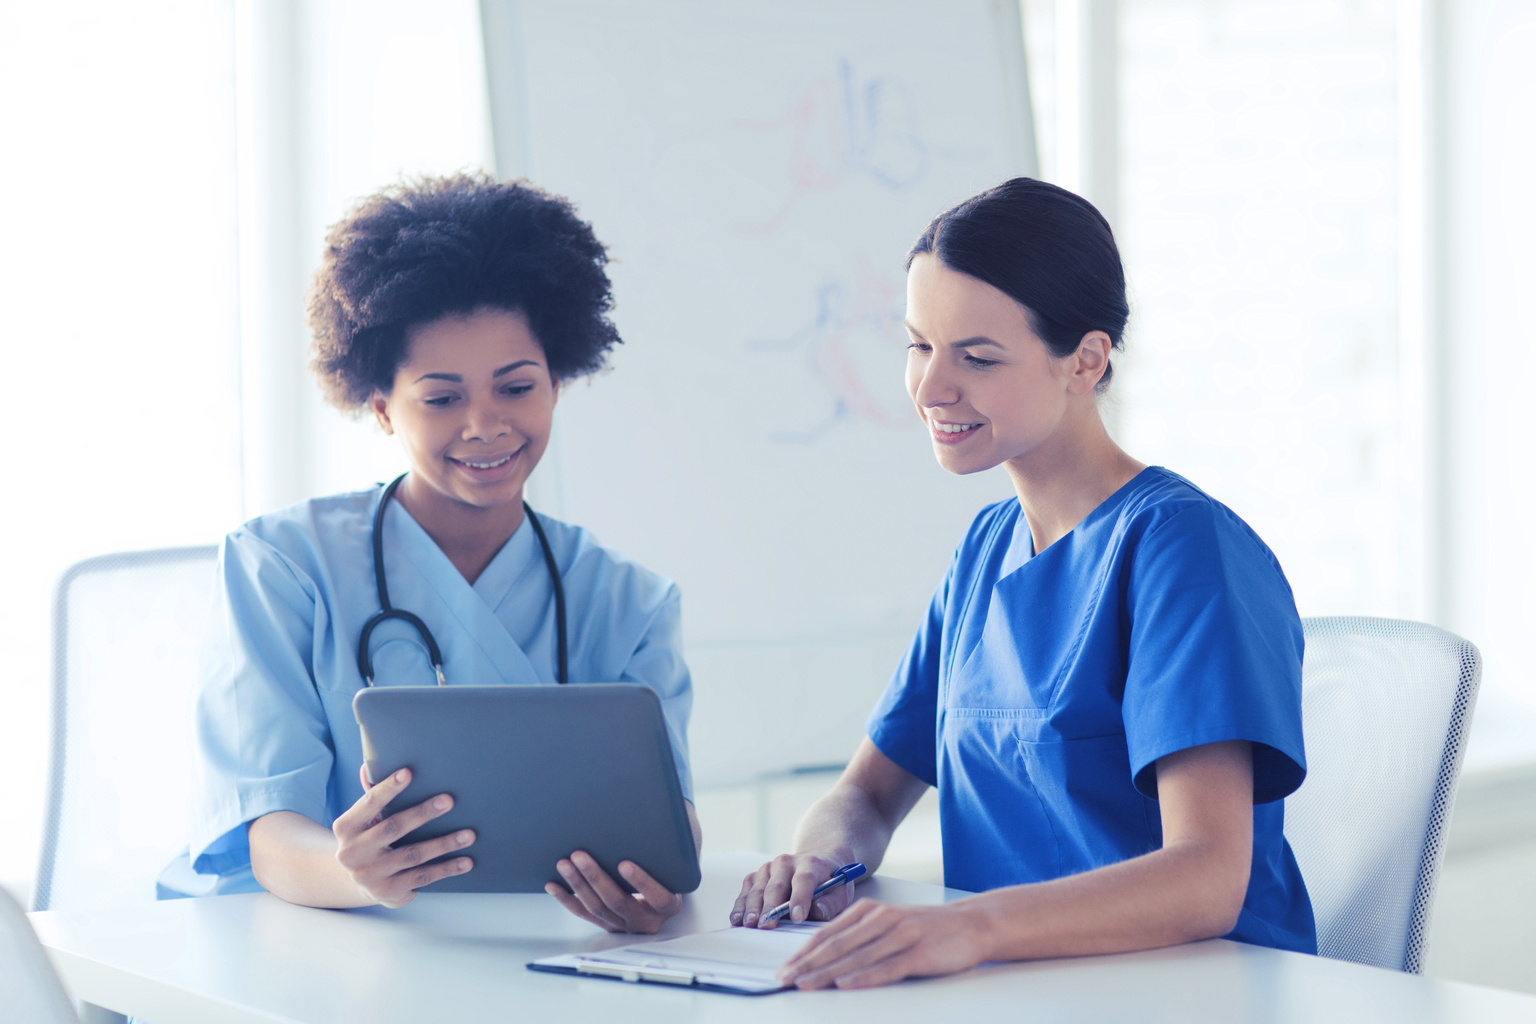 Two female healthcare professionals dressed in scrubs working on a tablet together